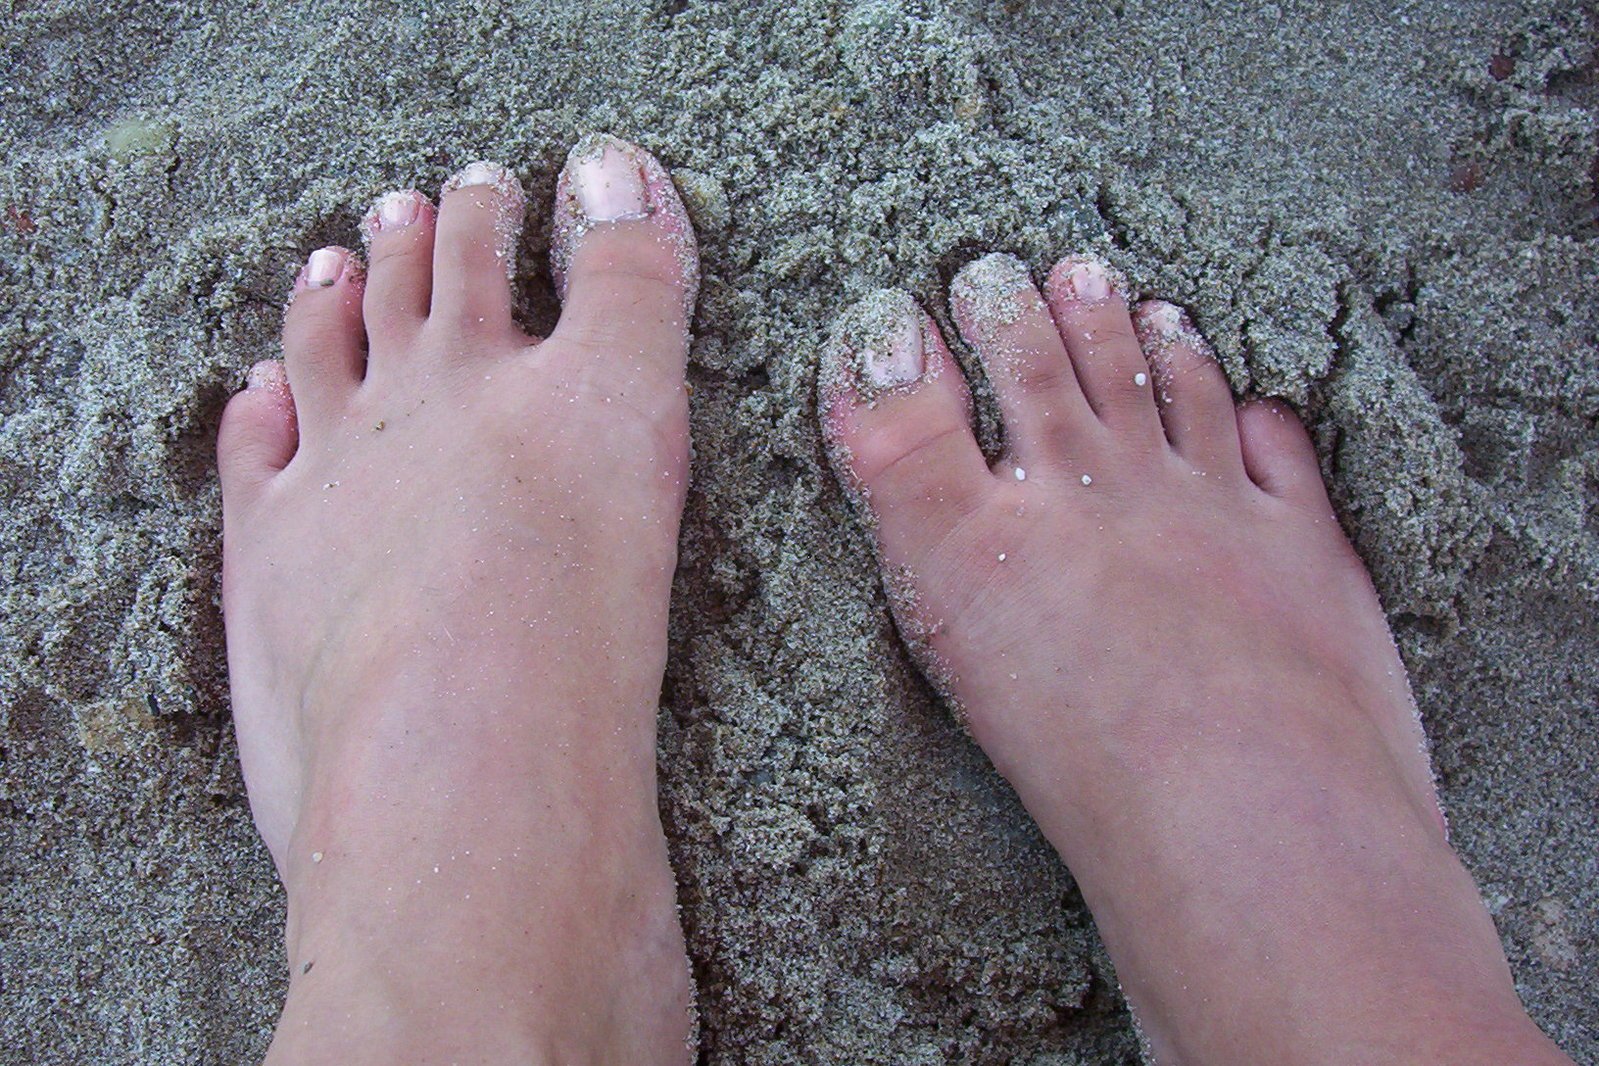 feet and ankles are covered with sand as it is almost completely white